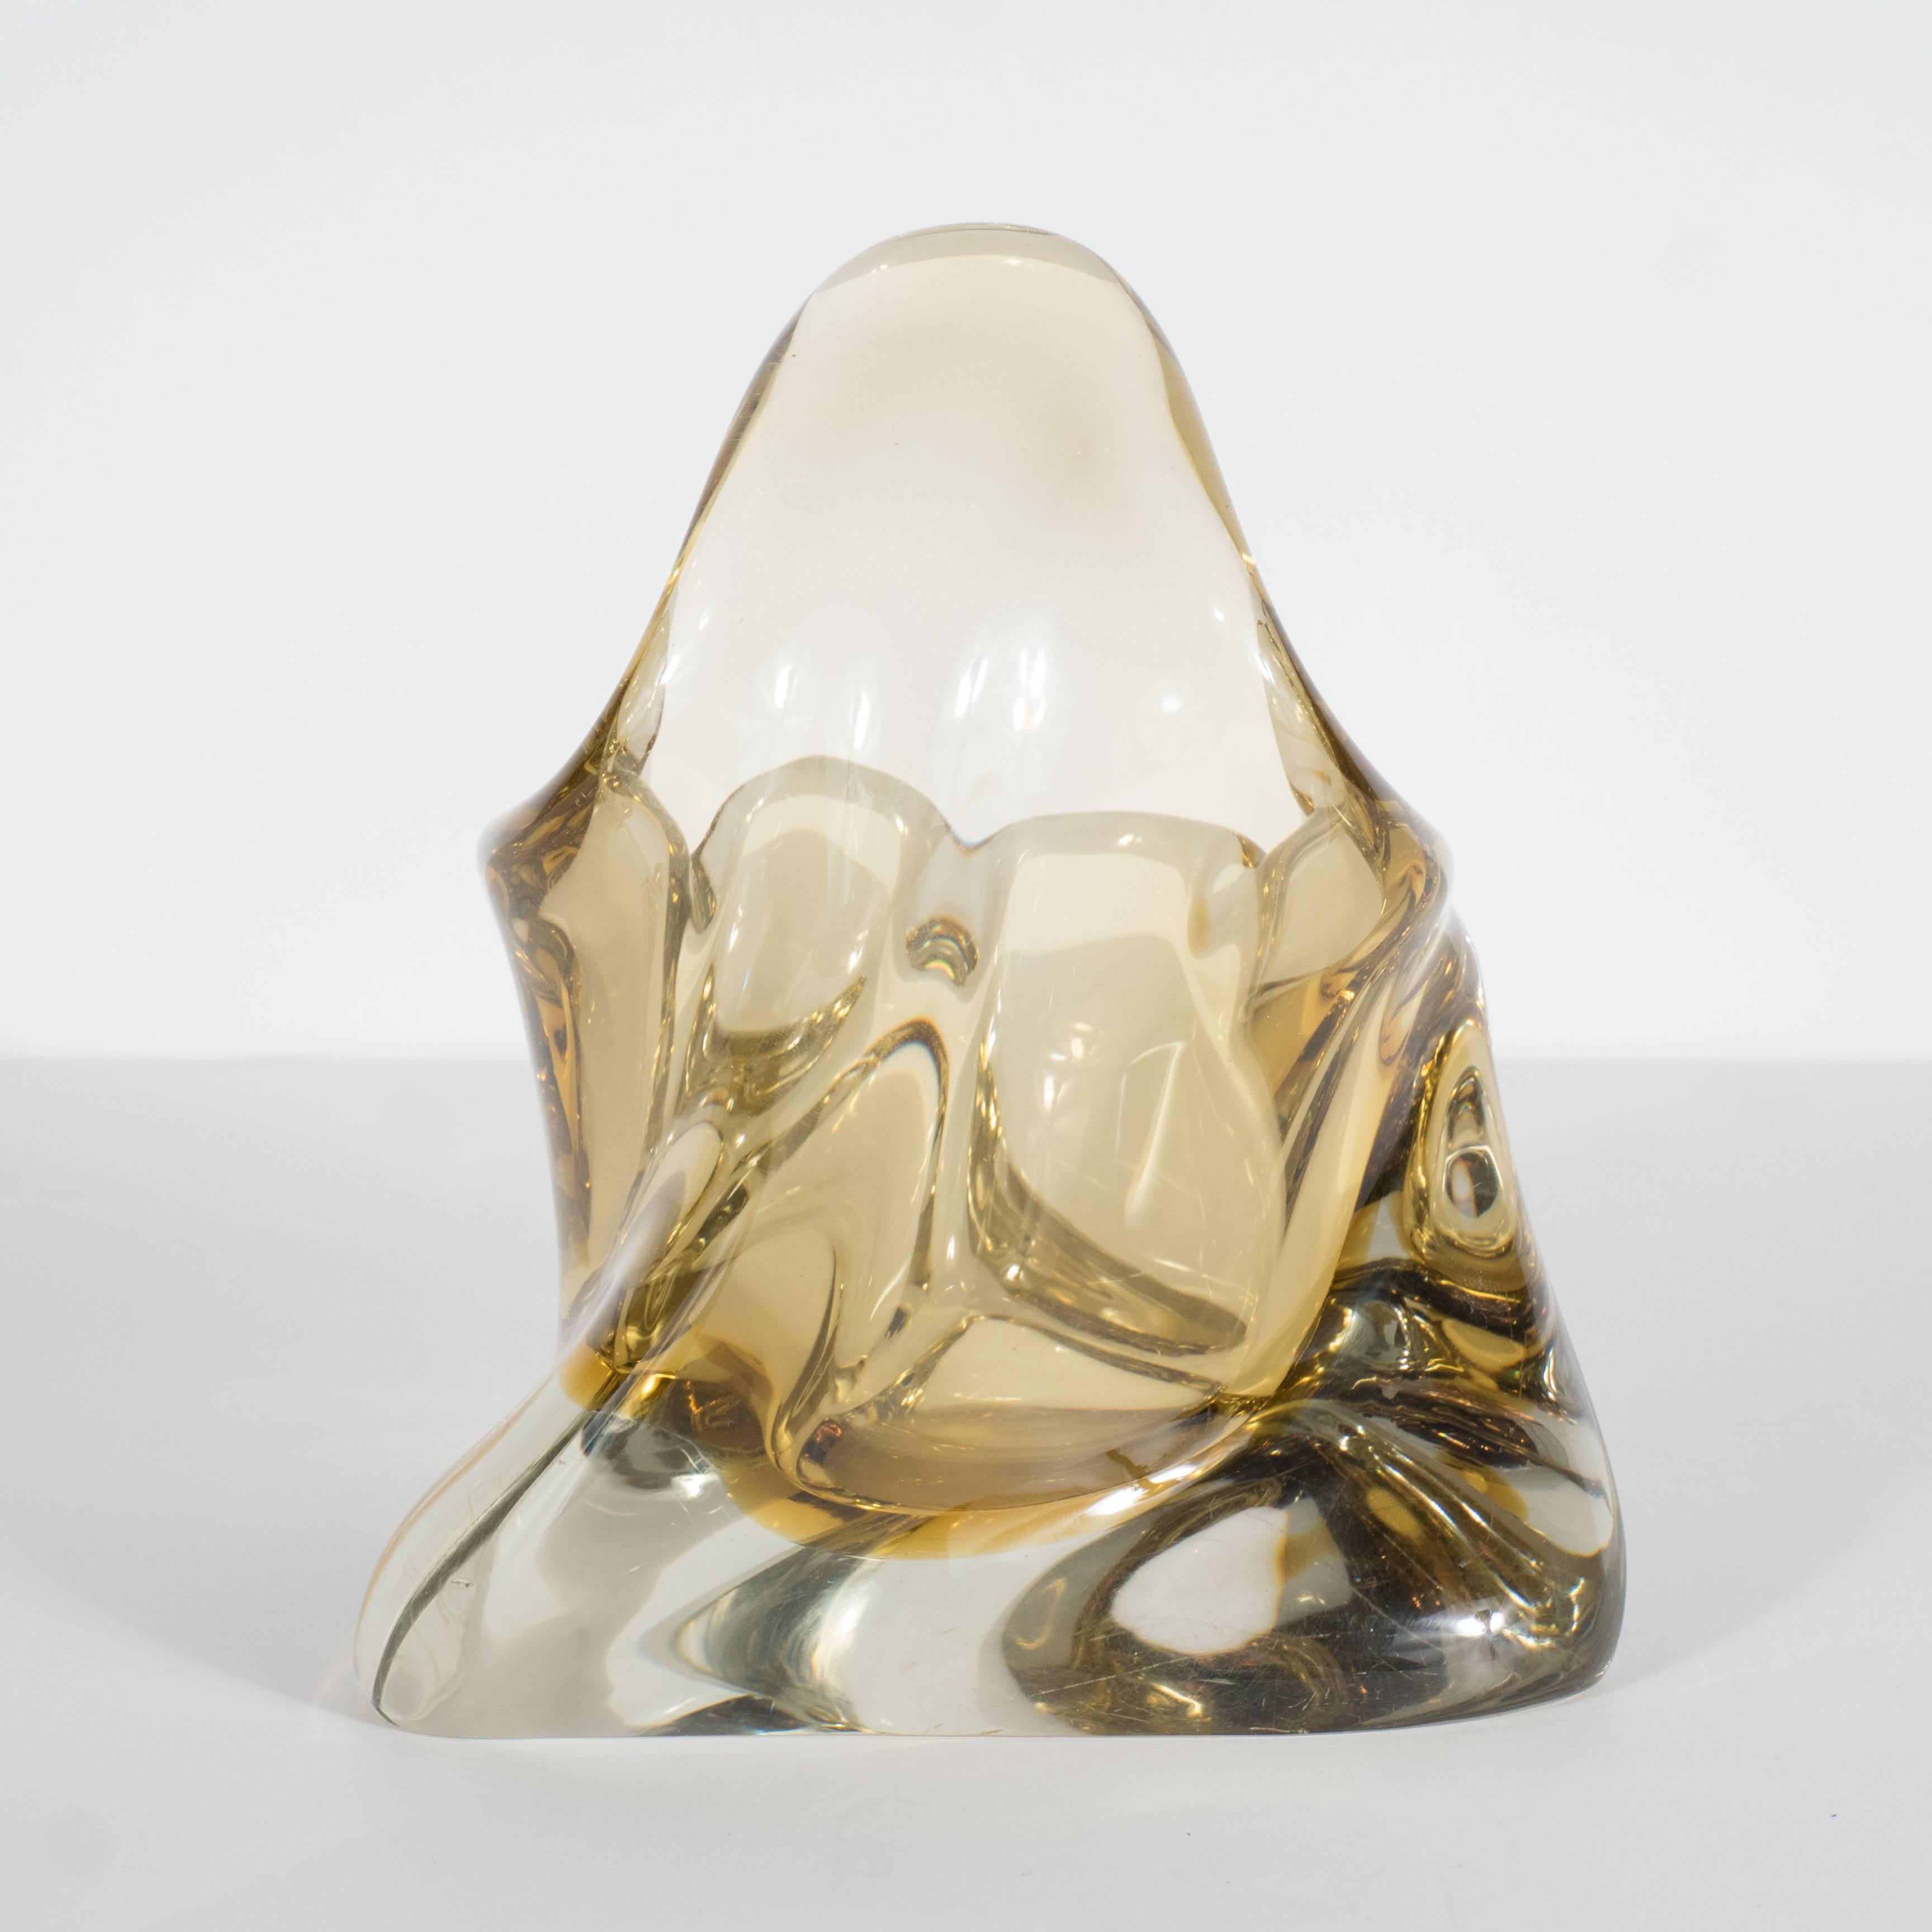 A Mid-Century canary yellow 'splash' handblown Murano glass ashtray. A three-sided curved base supports a spiraling form with two cigarette supports and a curved glass fold. A beautiful piece on its own as an objet for a shelf, console or tabletop.